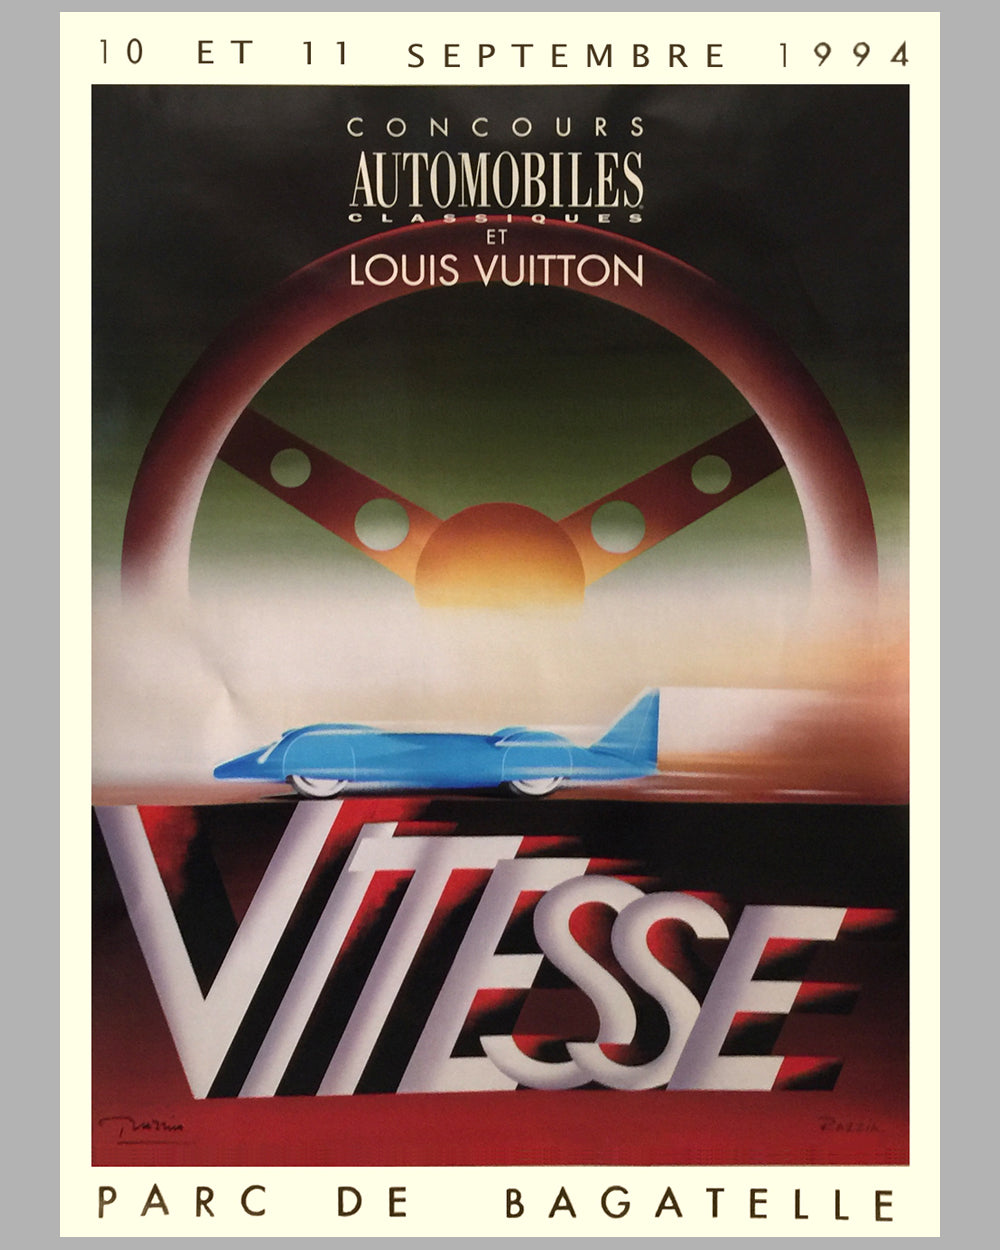 Louis Vuitton Traveling with Style exhibition at the Victoria & Albert  Museum large poster by Razzia